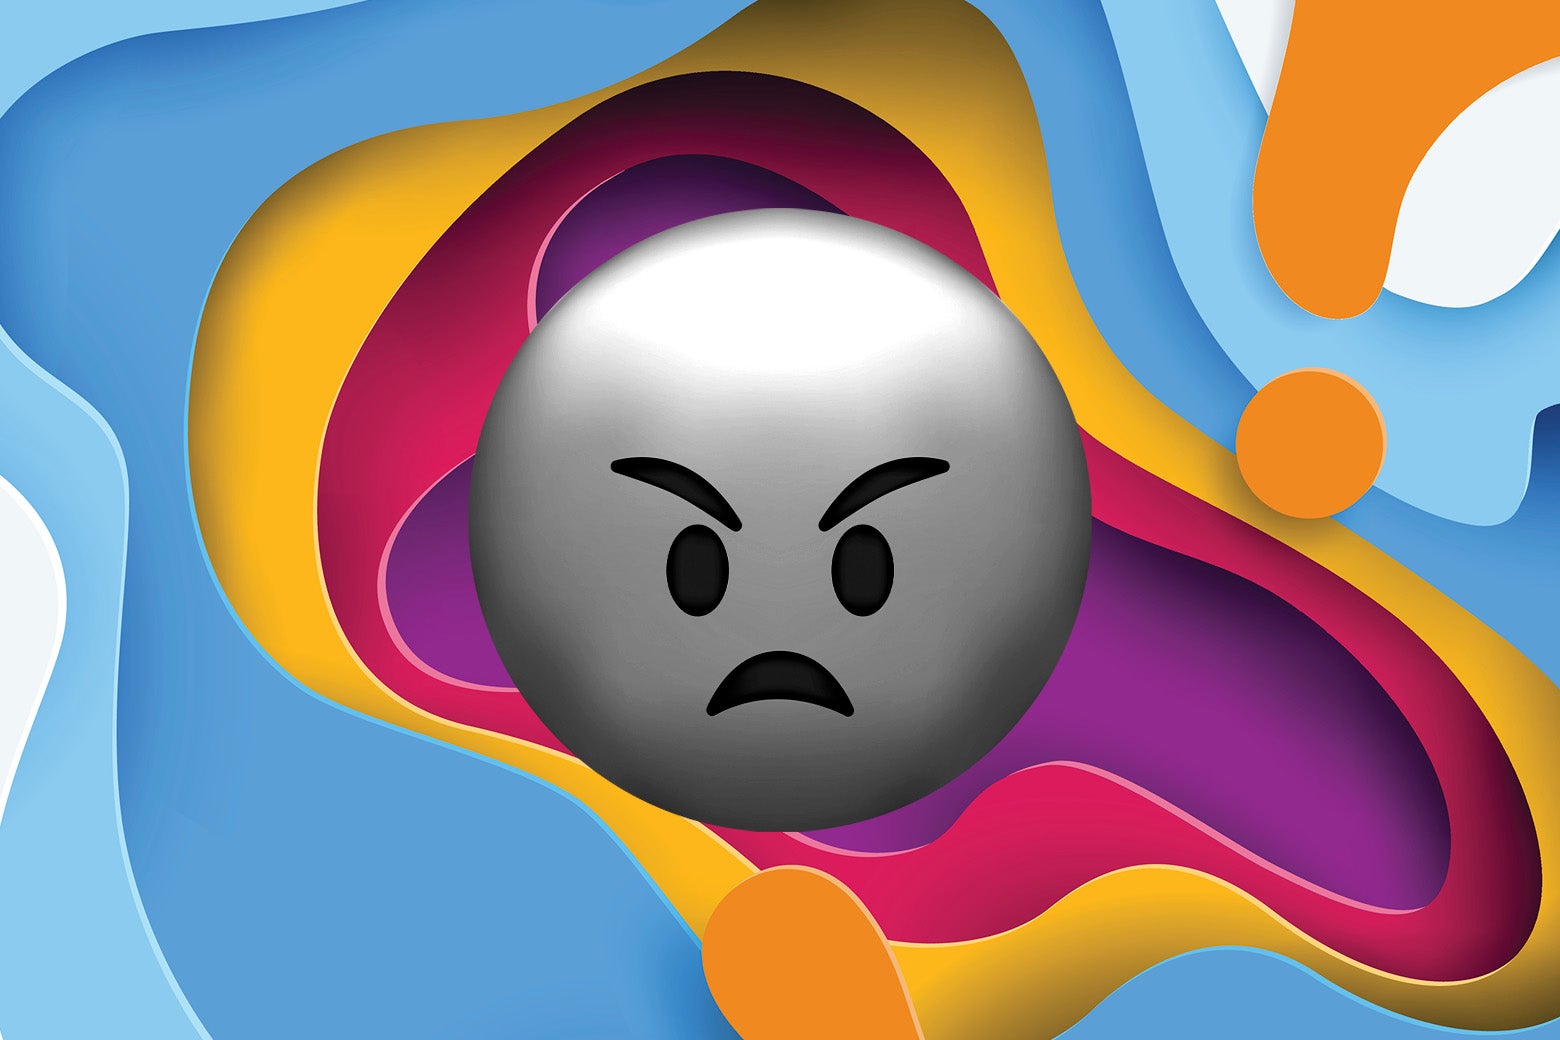 An enhanced angry emoji frowns against the colorful 